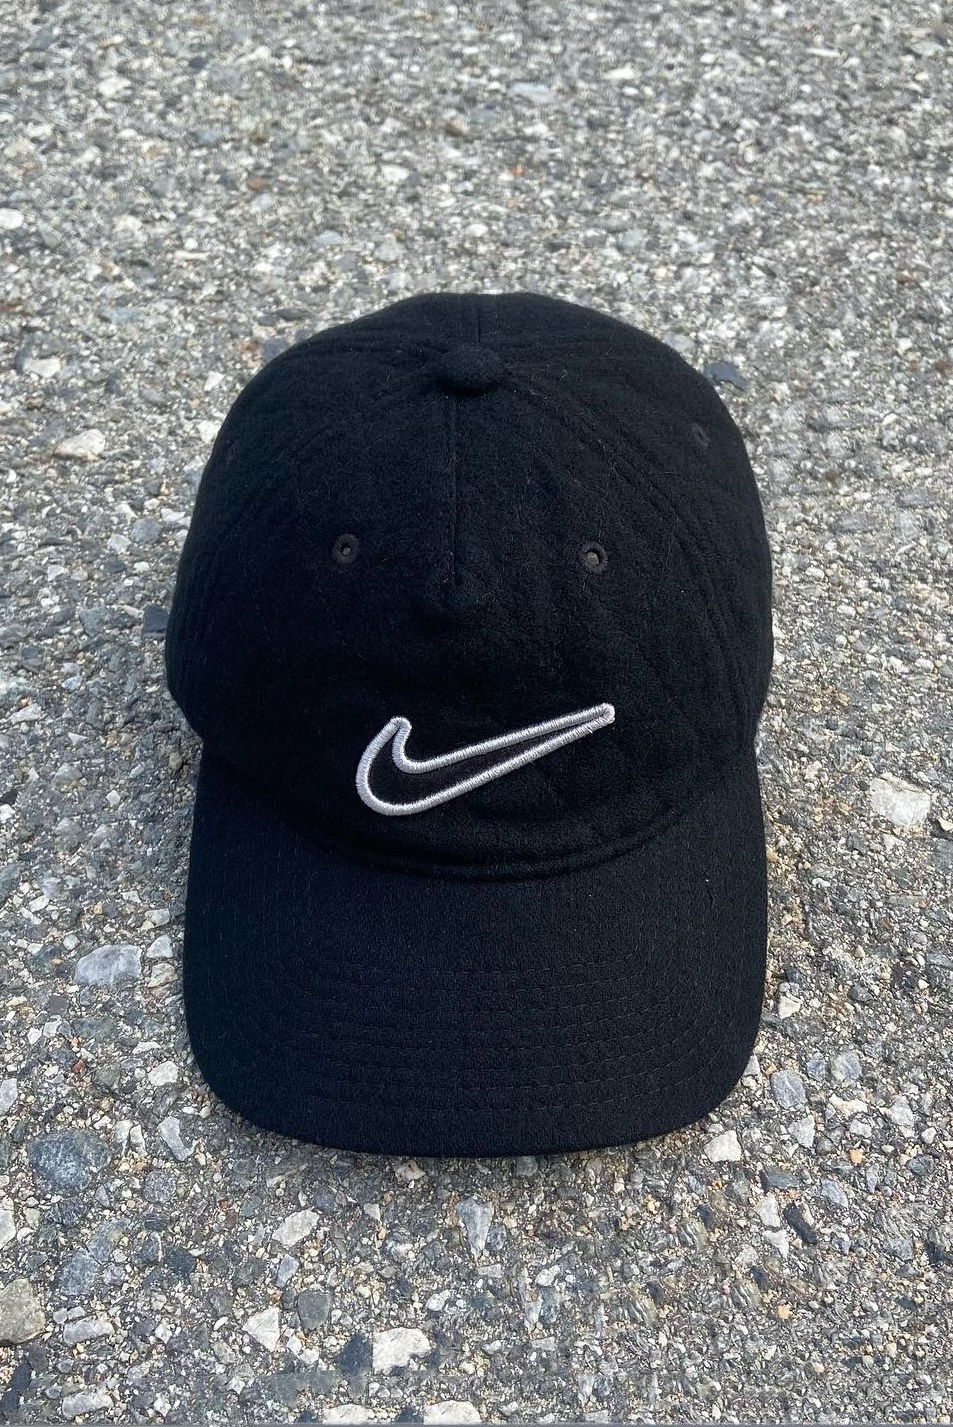 Nike Caps - 5 must-have accessories for men in 2022